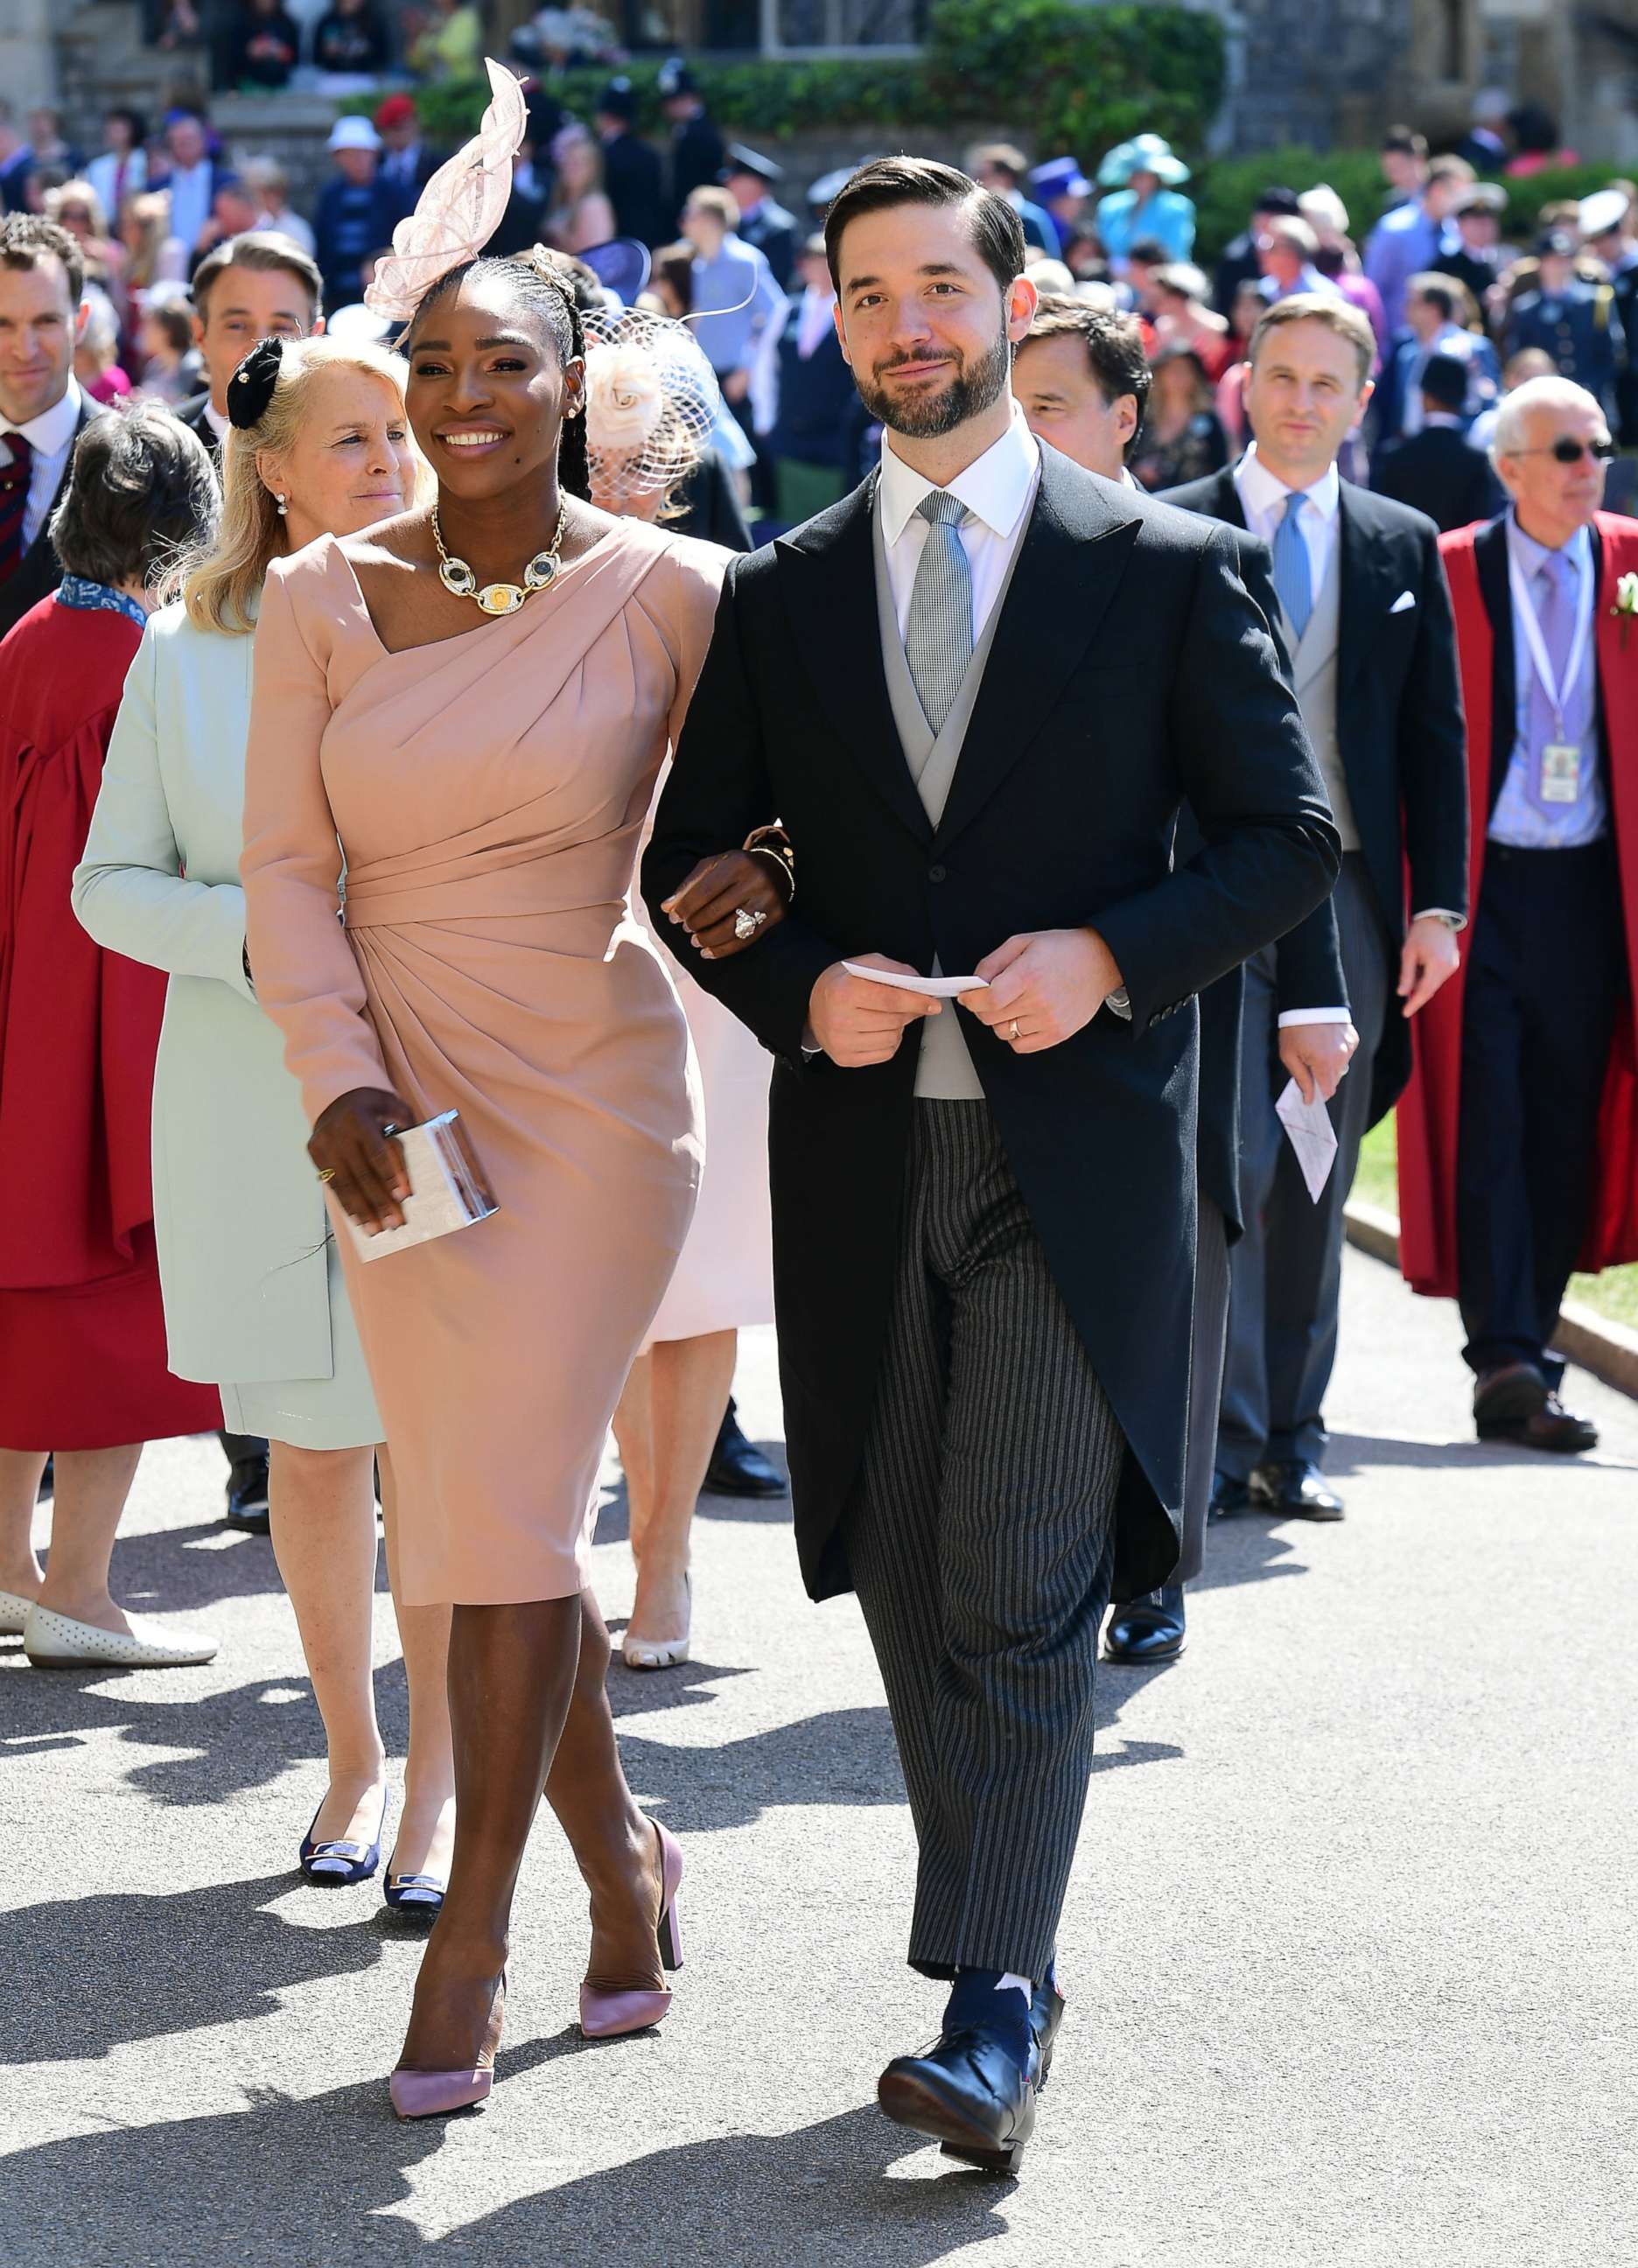 PHOTO: Serena Williams and her husband Alexis Ohanian arrive for the wedding ceremony of Britain's Prince Harry and Meghan Markle at St George's Chapel, Windsor Castle on May 19, 2018 in Windsor, England.